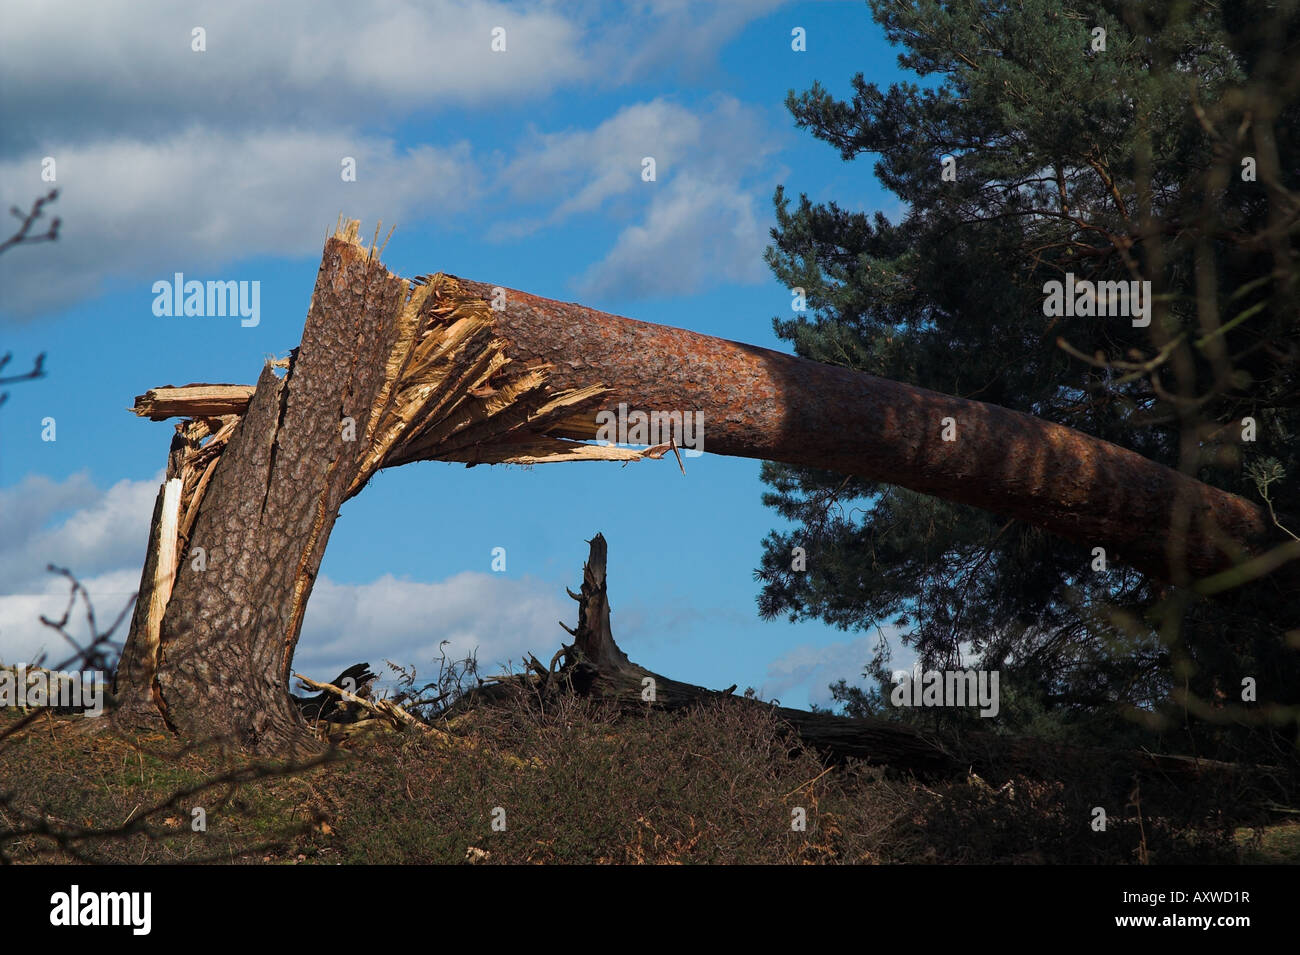 Mature tree blown over by strong winds with its trunk snapped Stock Photo